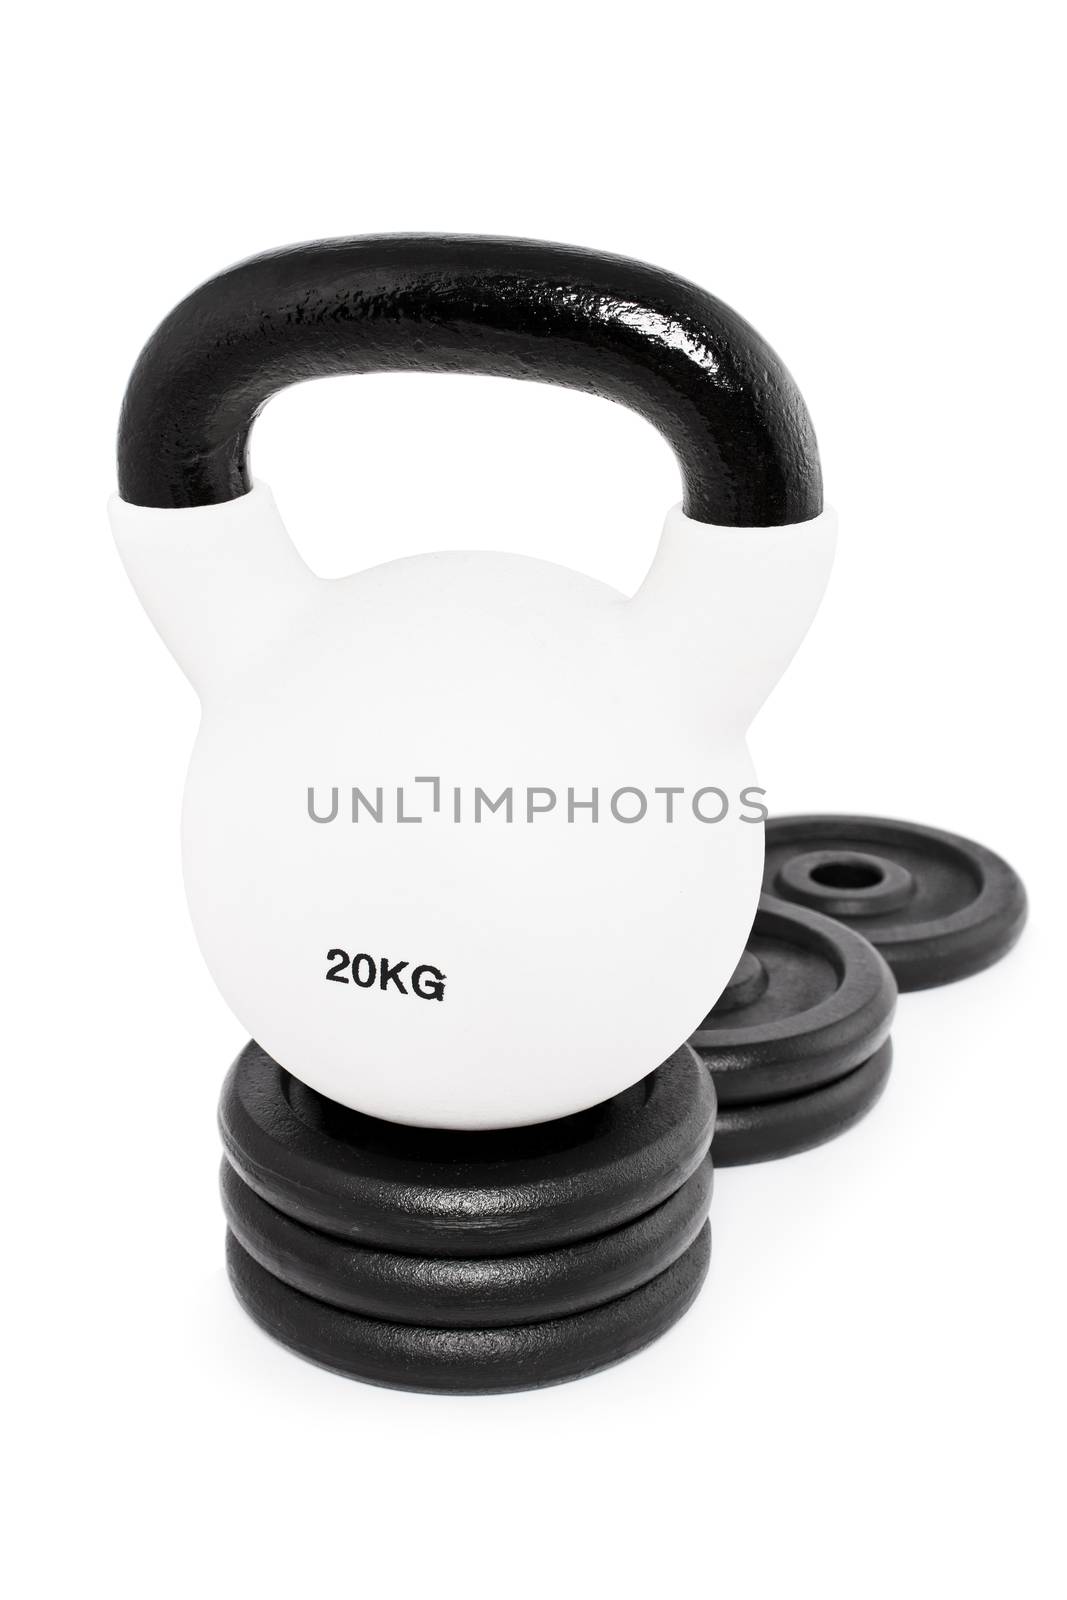 White heavy kettlebell on a pedestal of weight plates, isolated on a white background. Heavy win.

